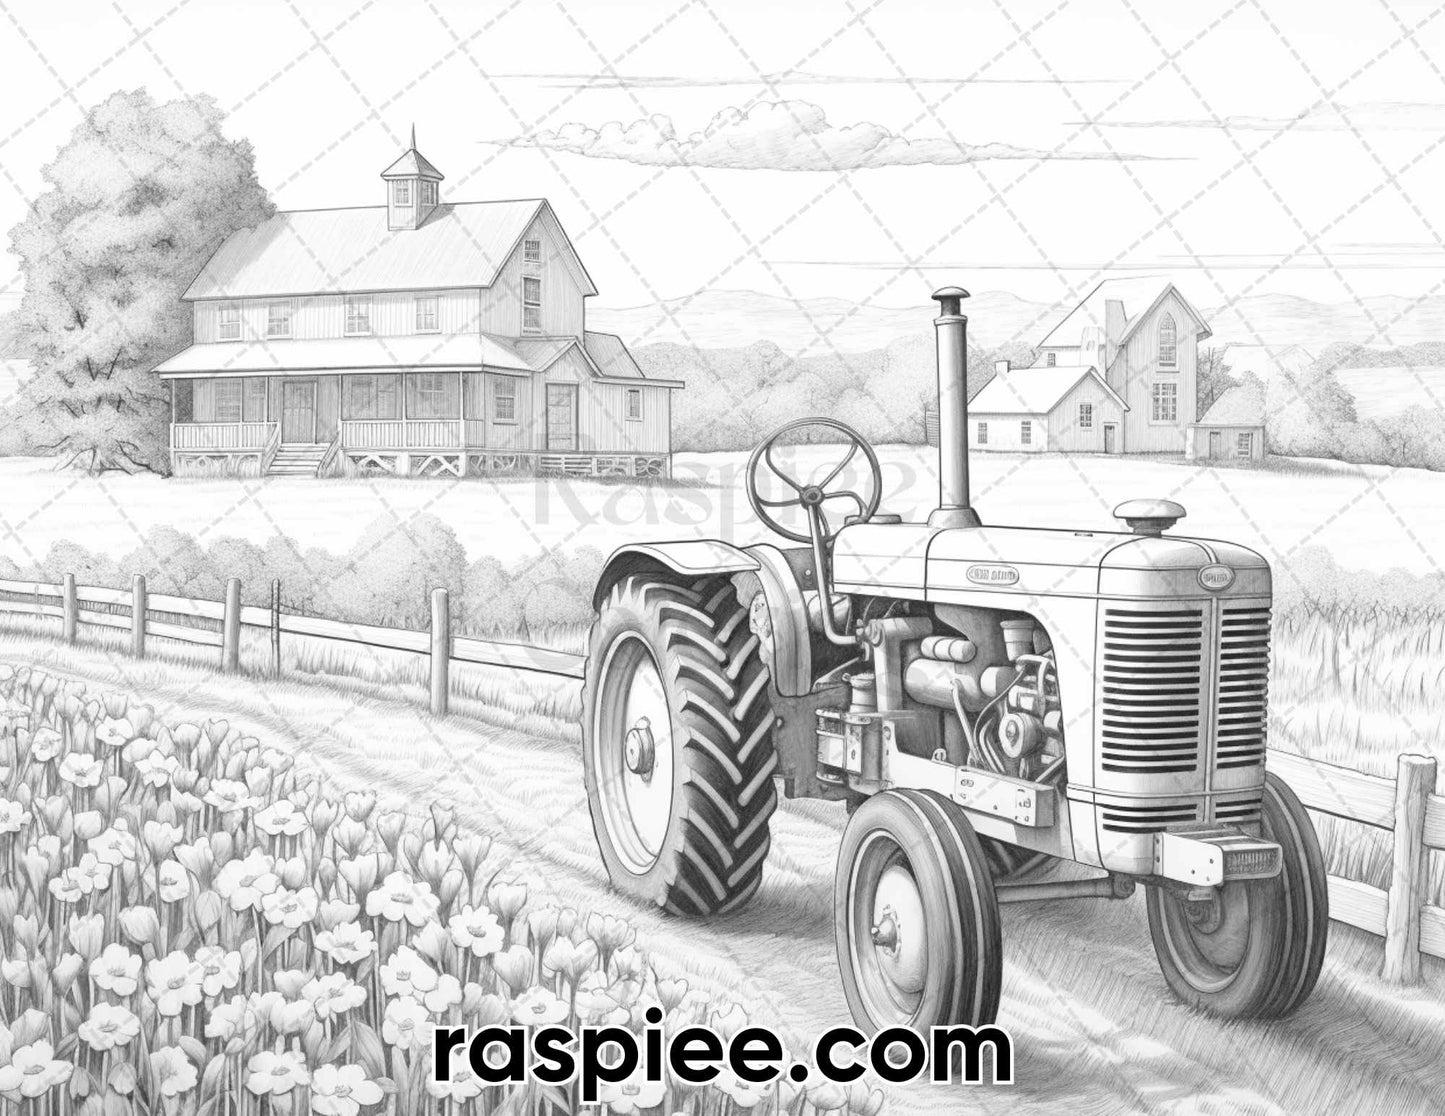 adult coloring pages, adult coloring sheets, adult coloring book pdf, adult coloring book printable, grayscale coloring pages, grayscale coloring books, spring coloring pages for adults, spring coloring book pdf, landscapes coloring pages for adults, farm life coloring pages, farm animal coloring pages